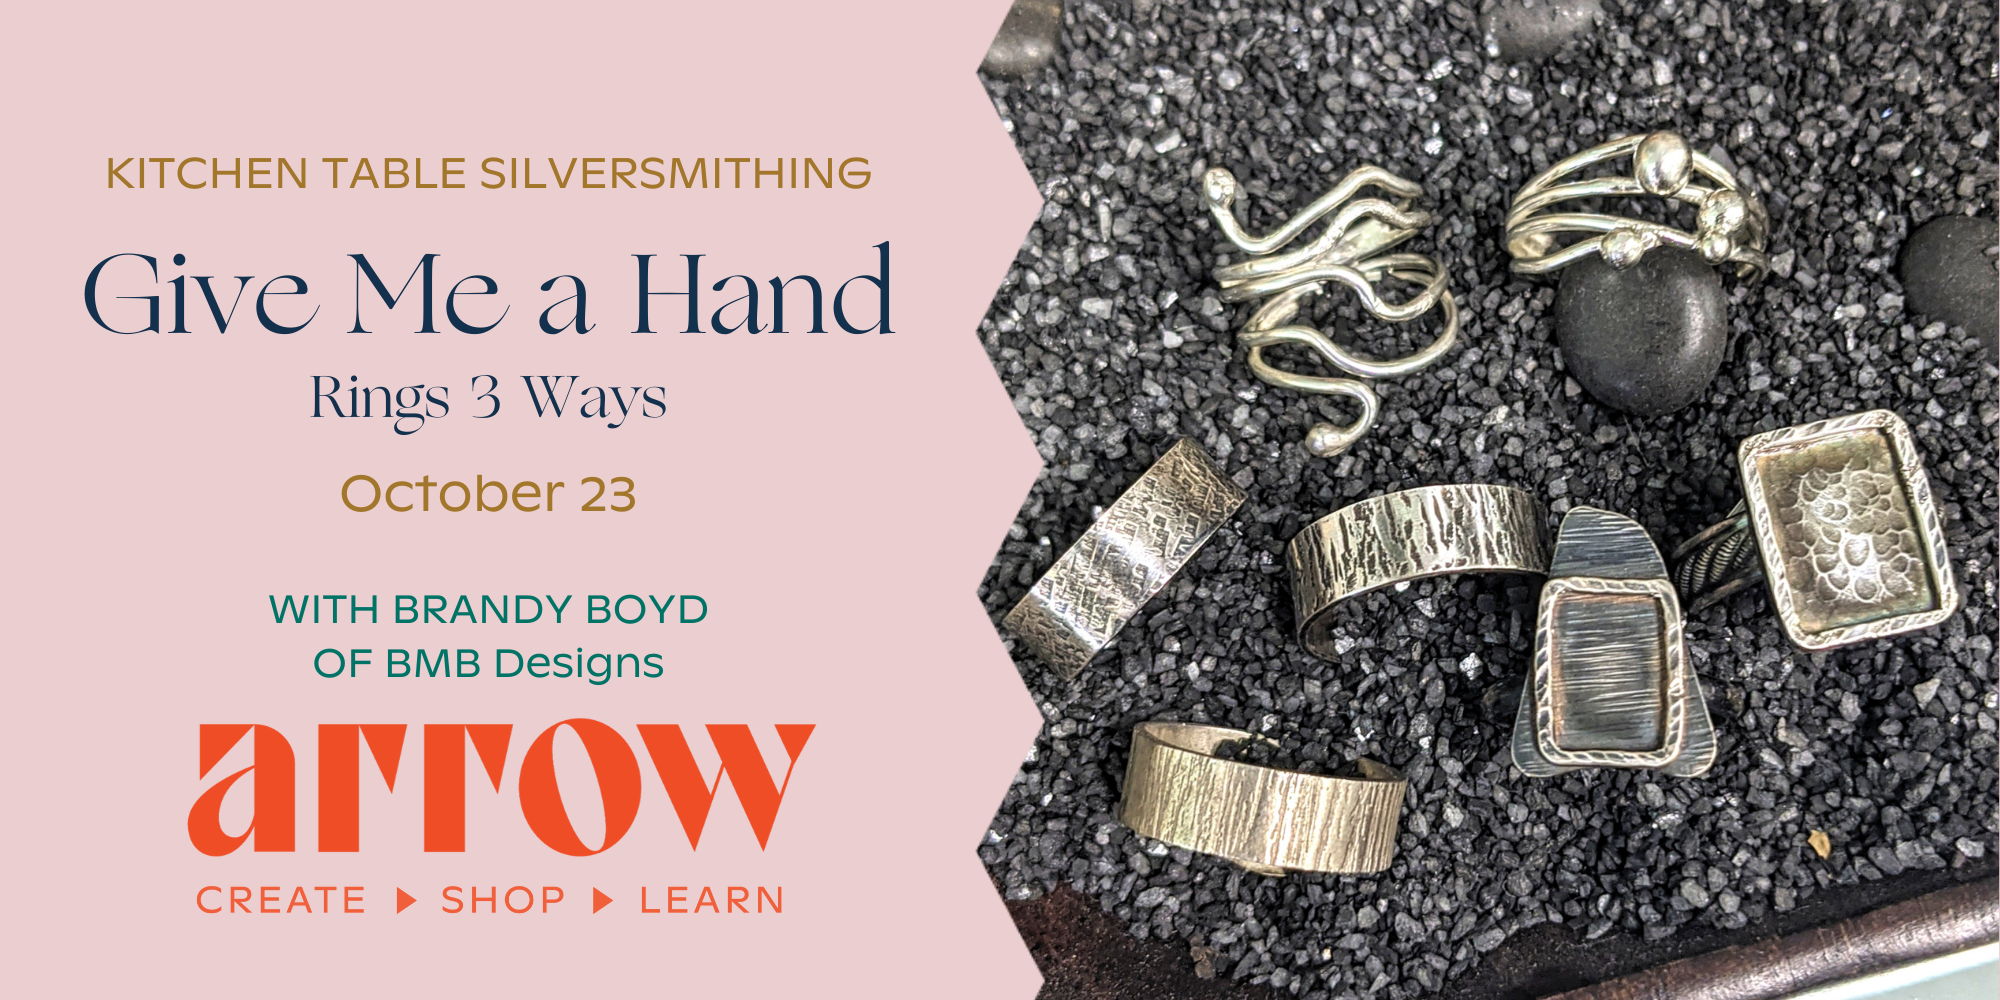 Rings 3 Ways Jewelry Workshop with BMB Designs  promotional image